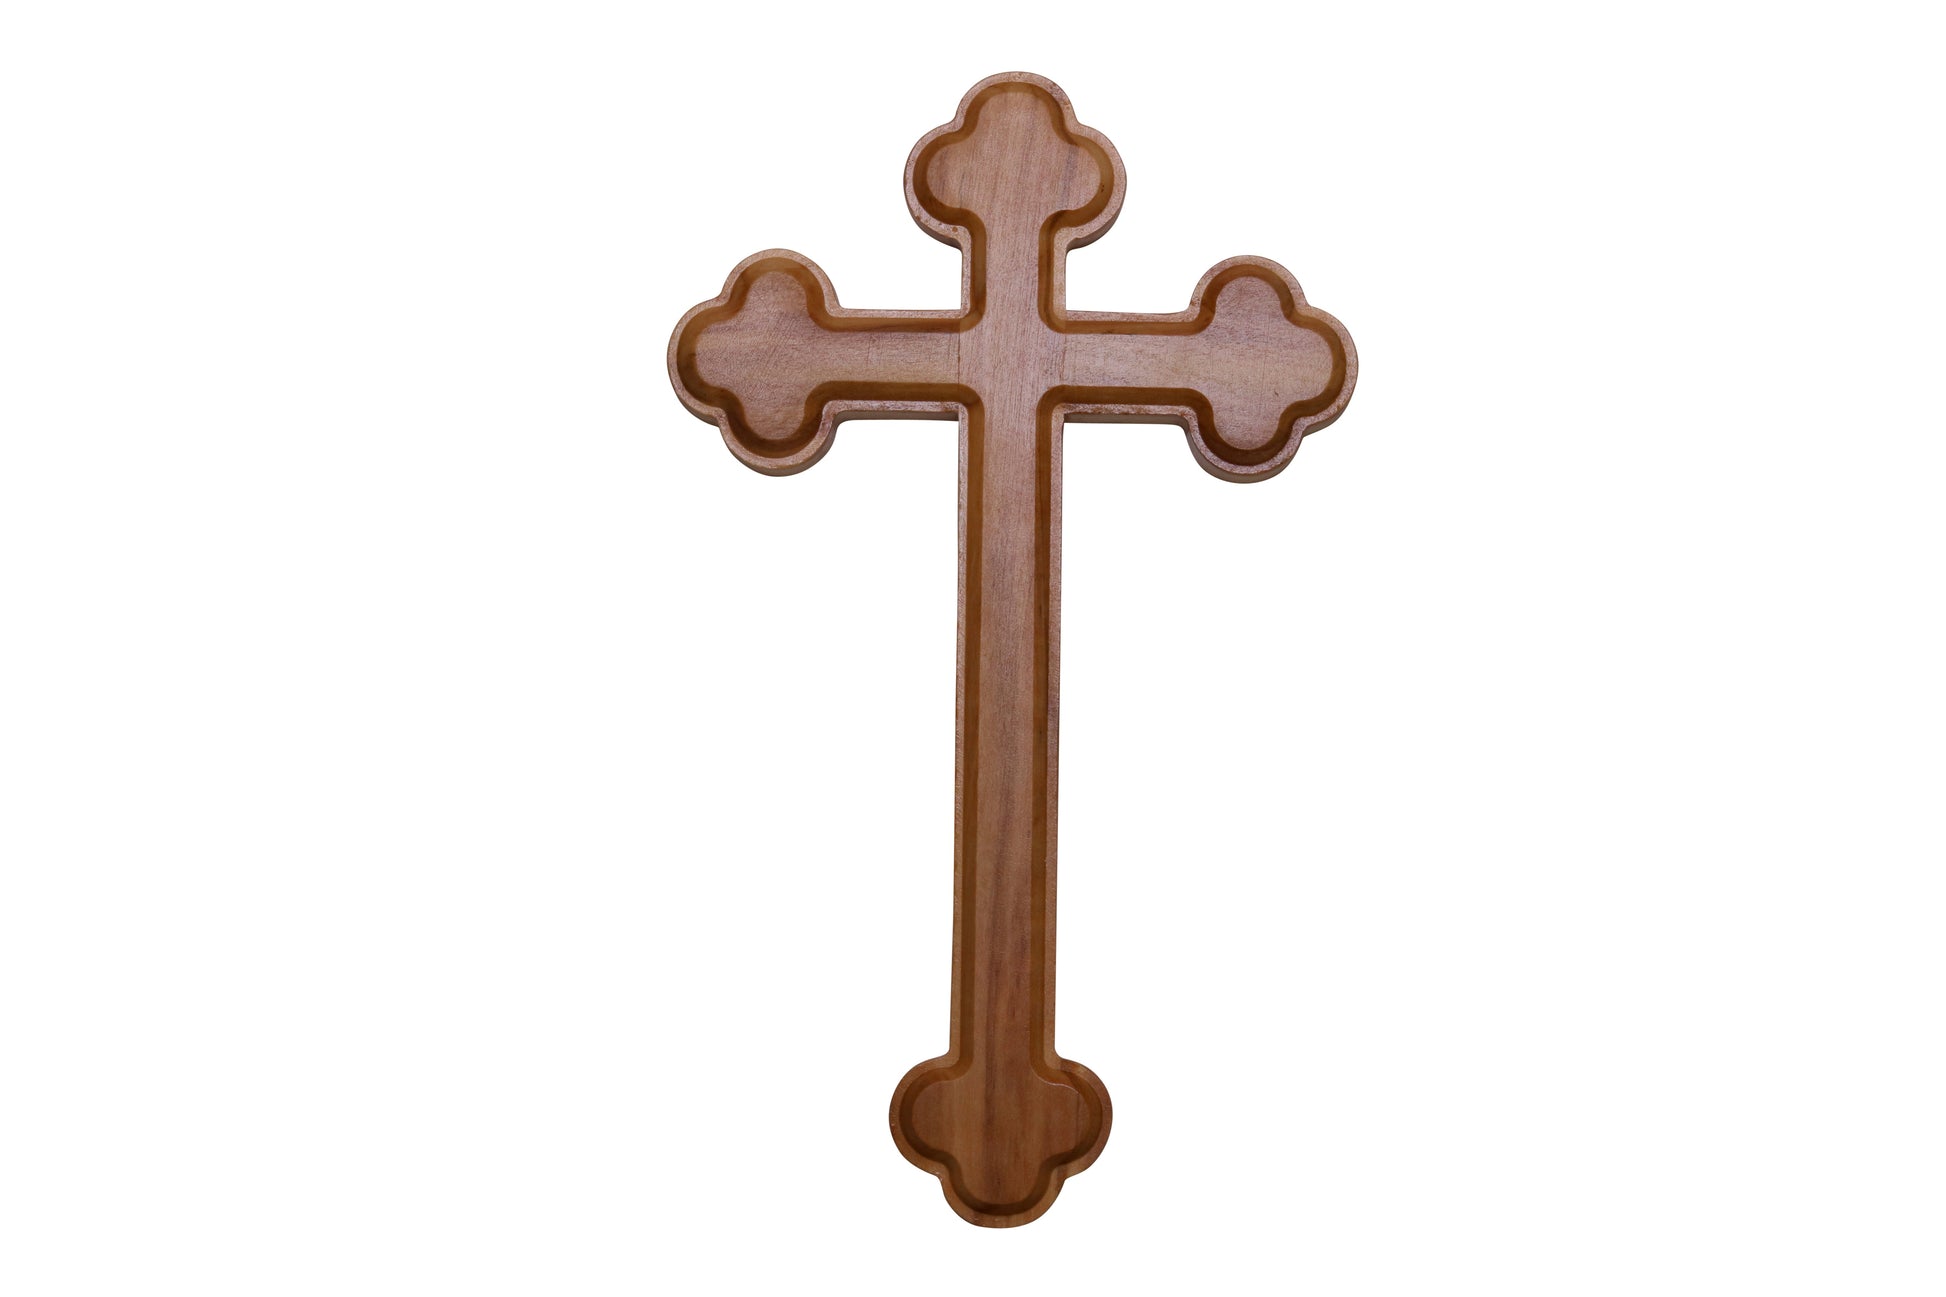 The 'Trinity Bloom' Olive Wood Cross, handcrafted in the Holy Land, featuring a smooth surface with a rich wood grain and distinctive clover-like ends on each arm, symbolizing the Holy Trinity. The cross has a prominent vertical beam and a shorter horizontal beam, with a subtle ridge outlining its classic shape.